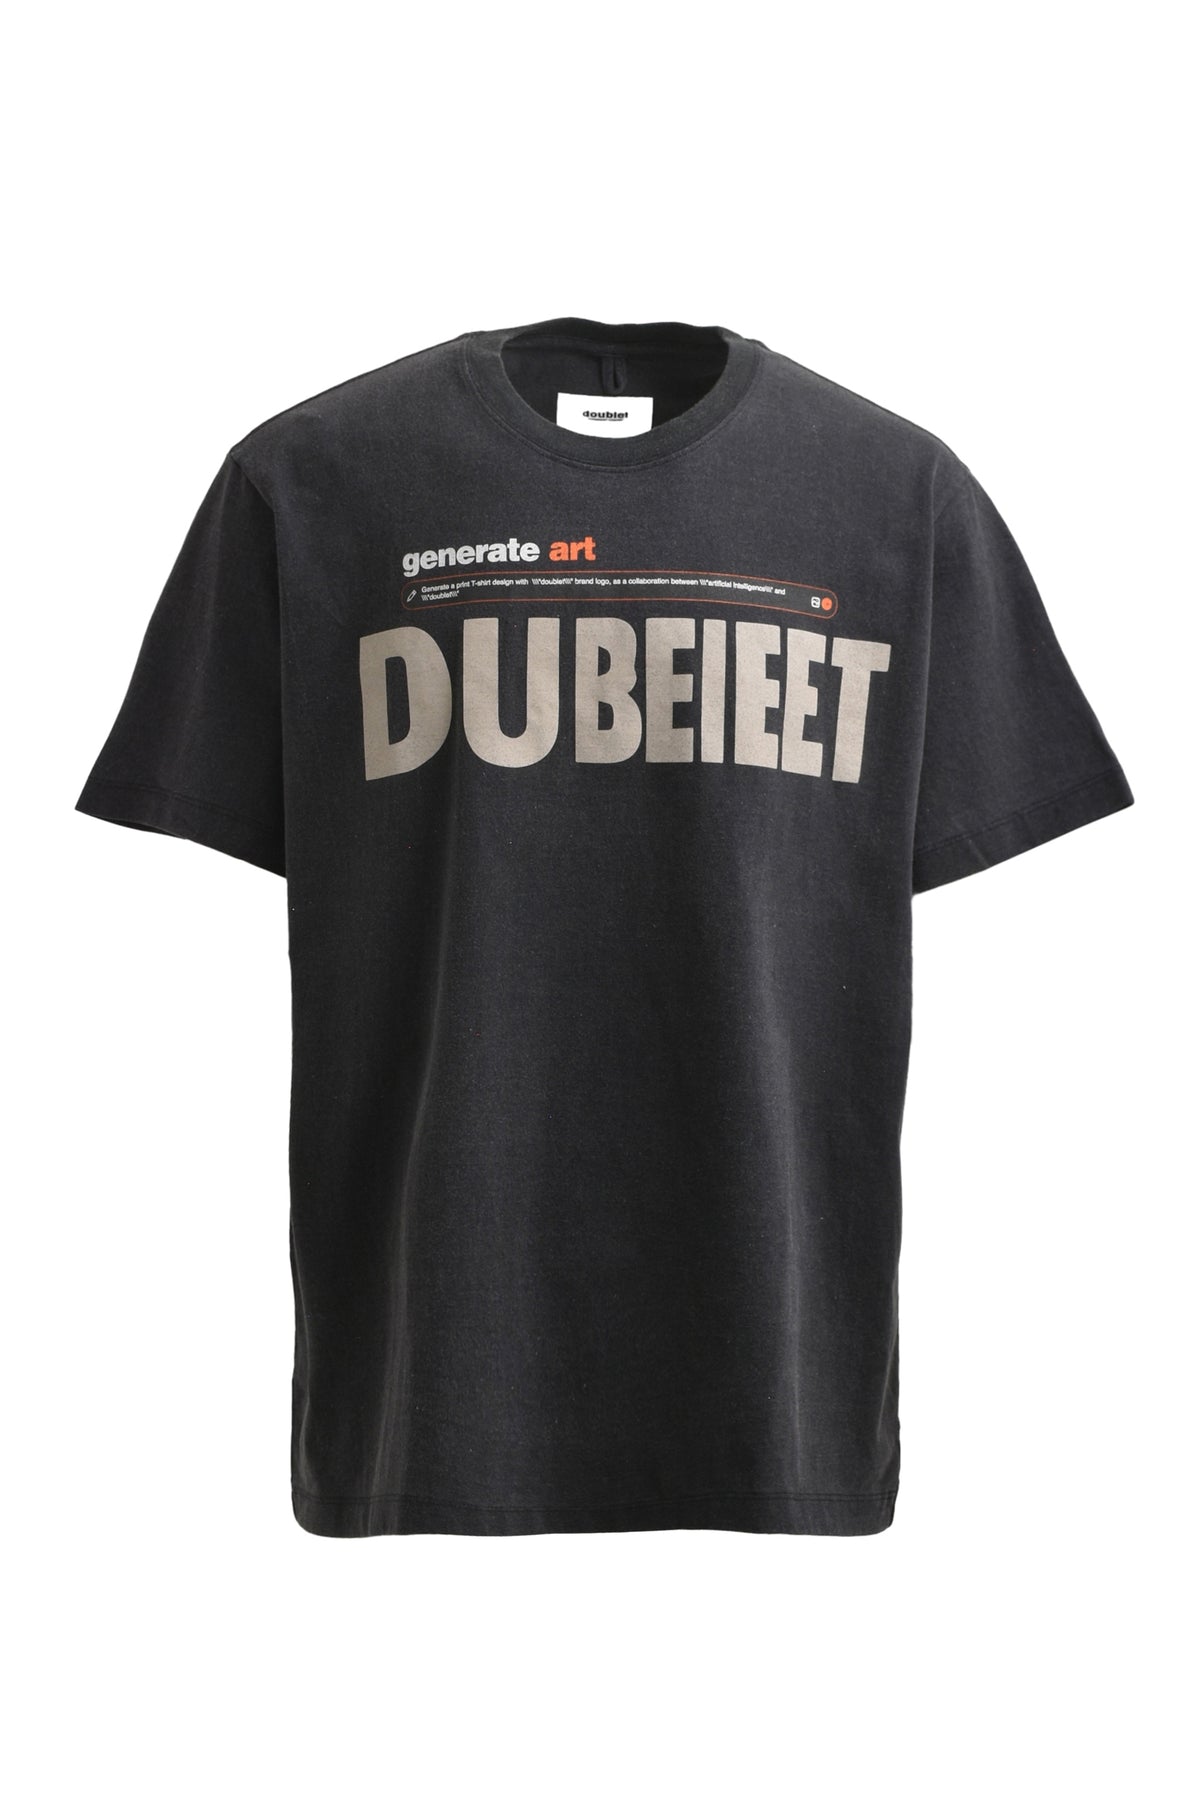 AI-GENERATED "DOUBLET" LOGO T-SHIRT / BLK